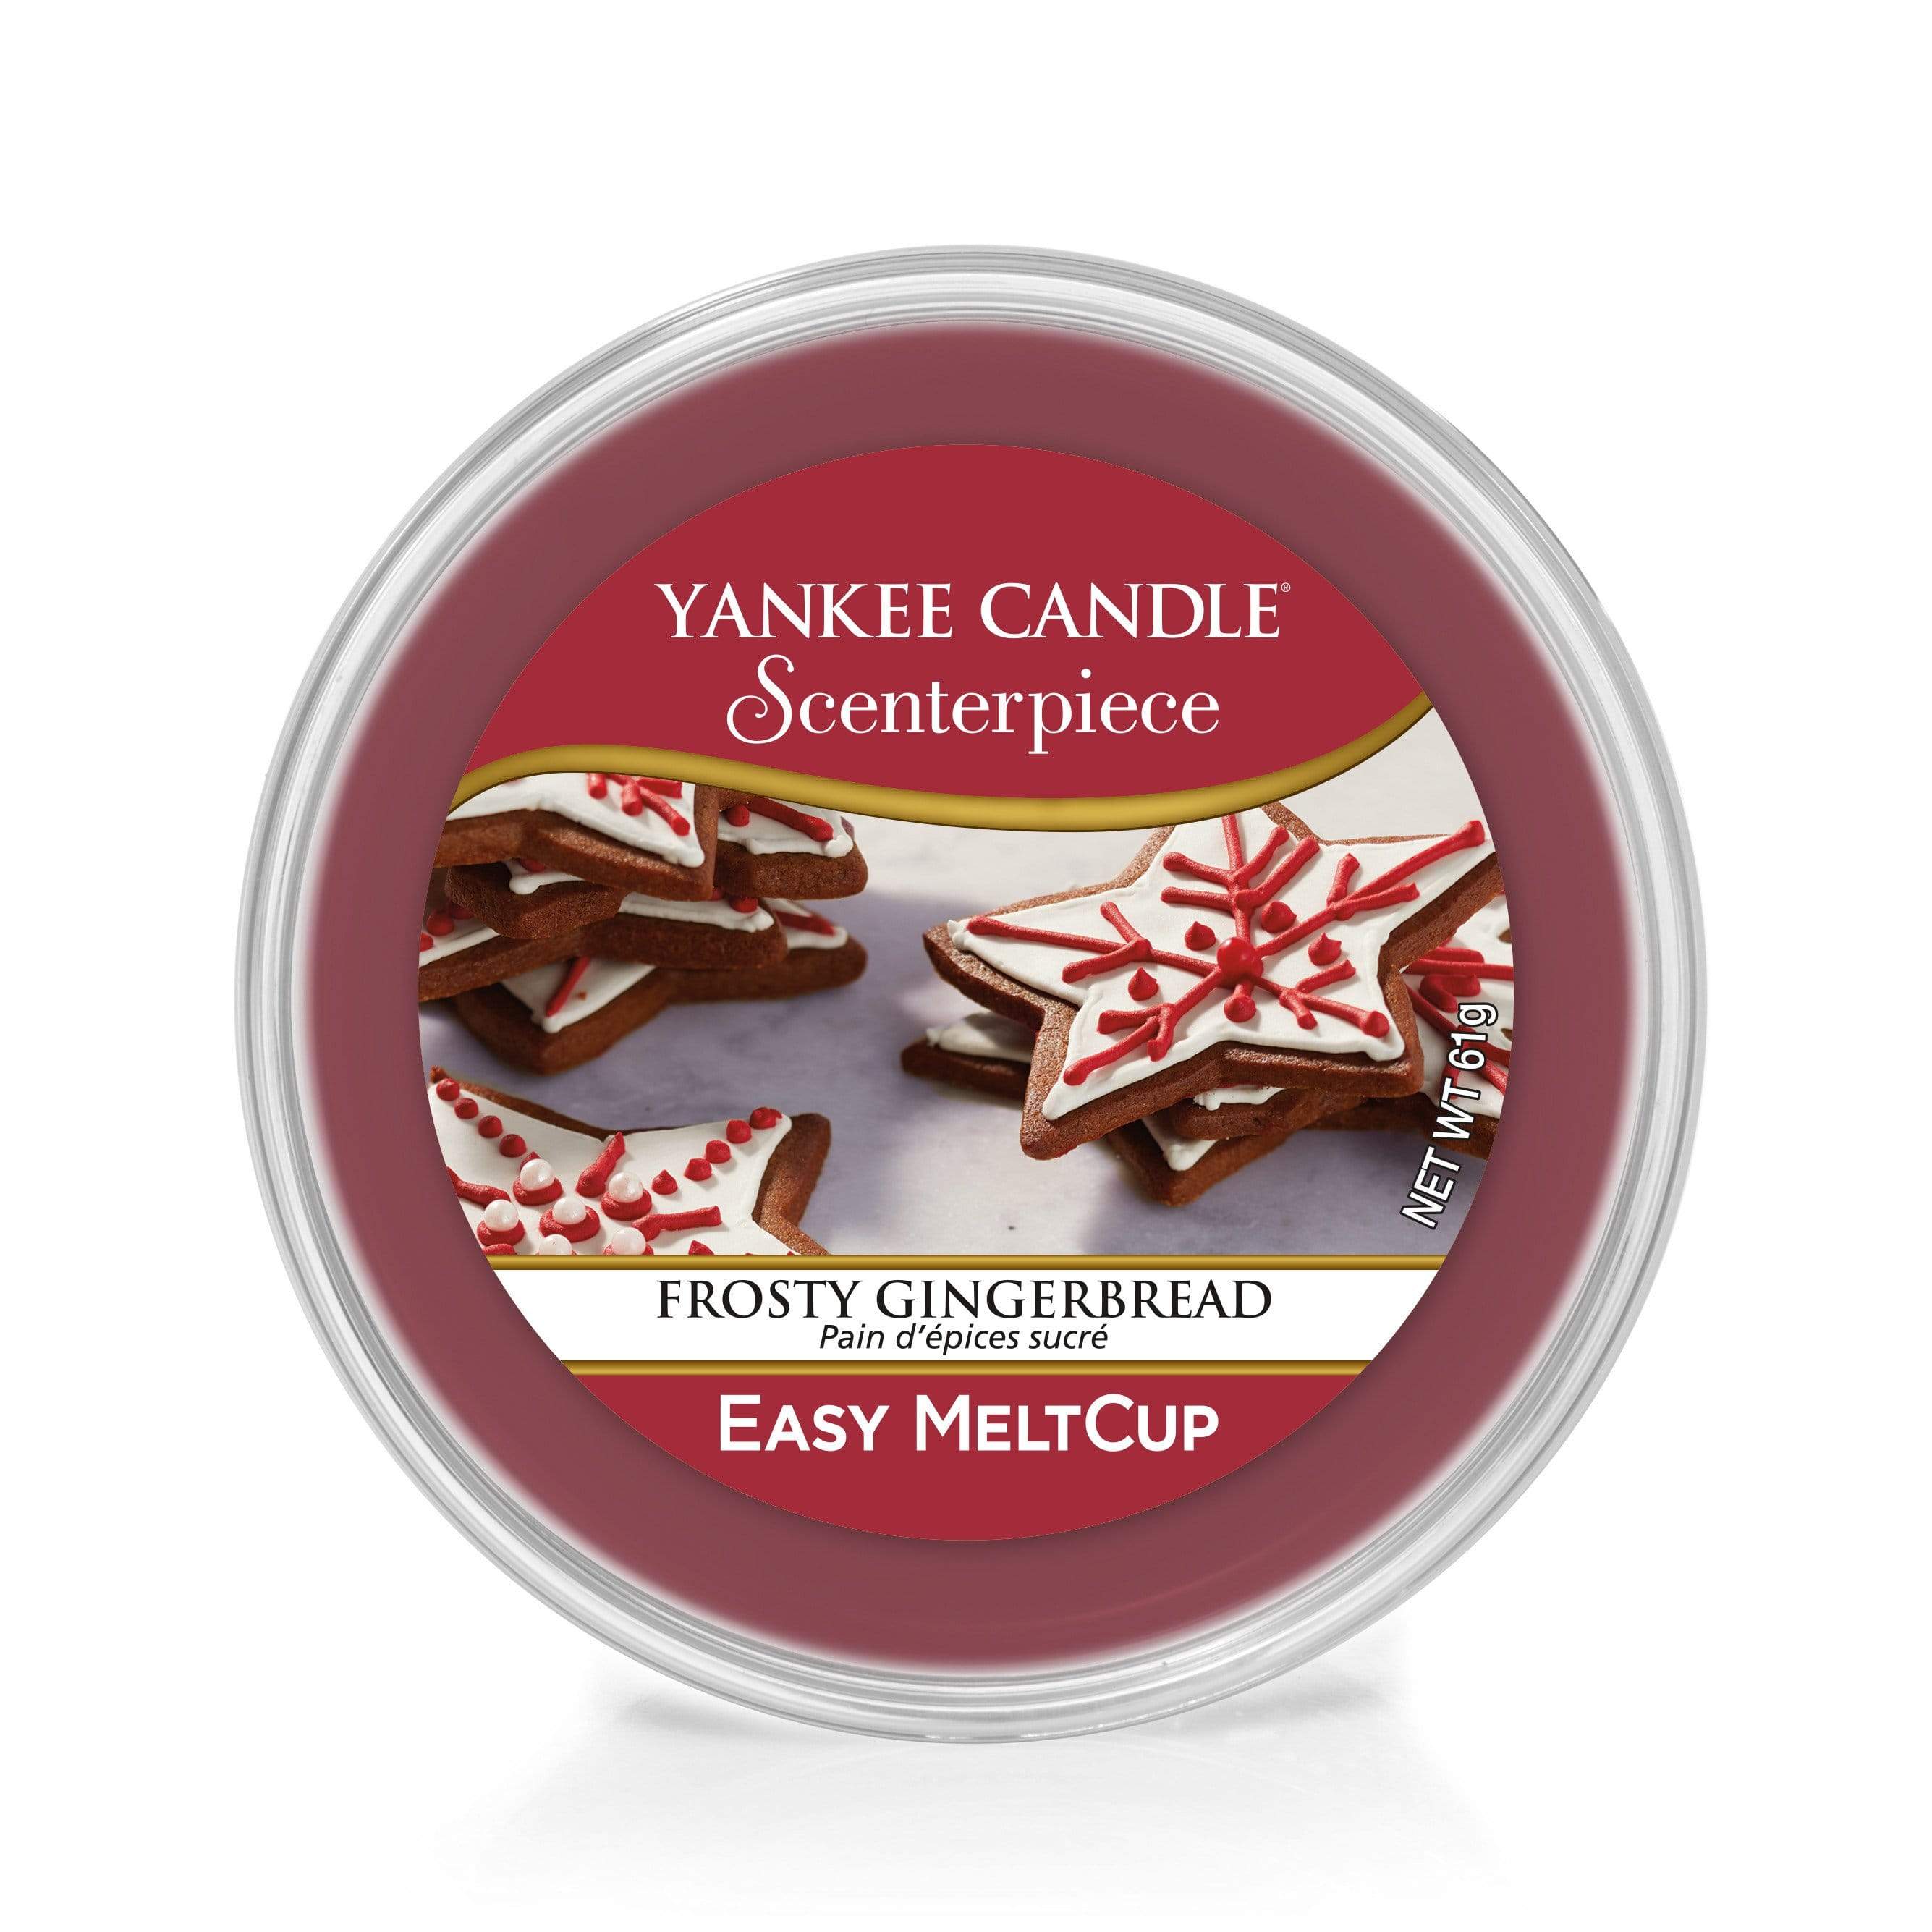 Yankee Candle Melt Cup Yankee Candle Scenterpiece Melt Cup - Frosty Gingerbread